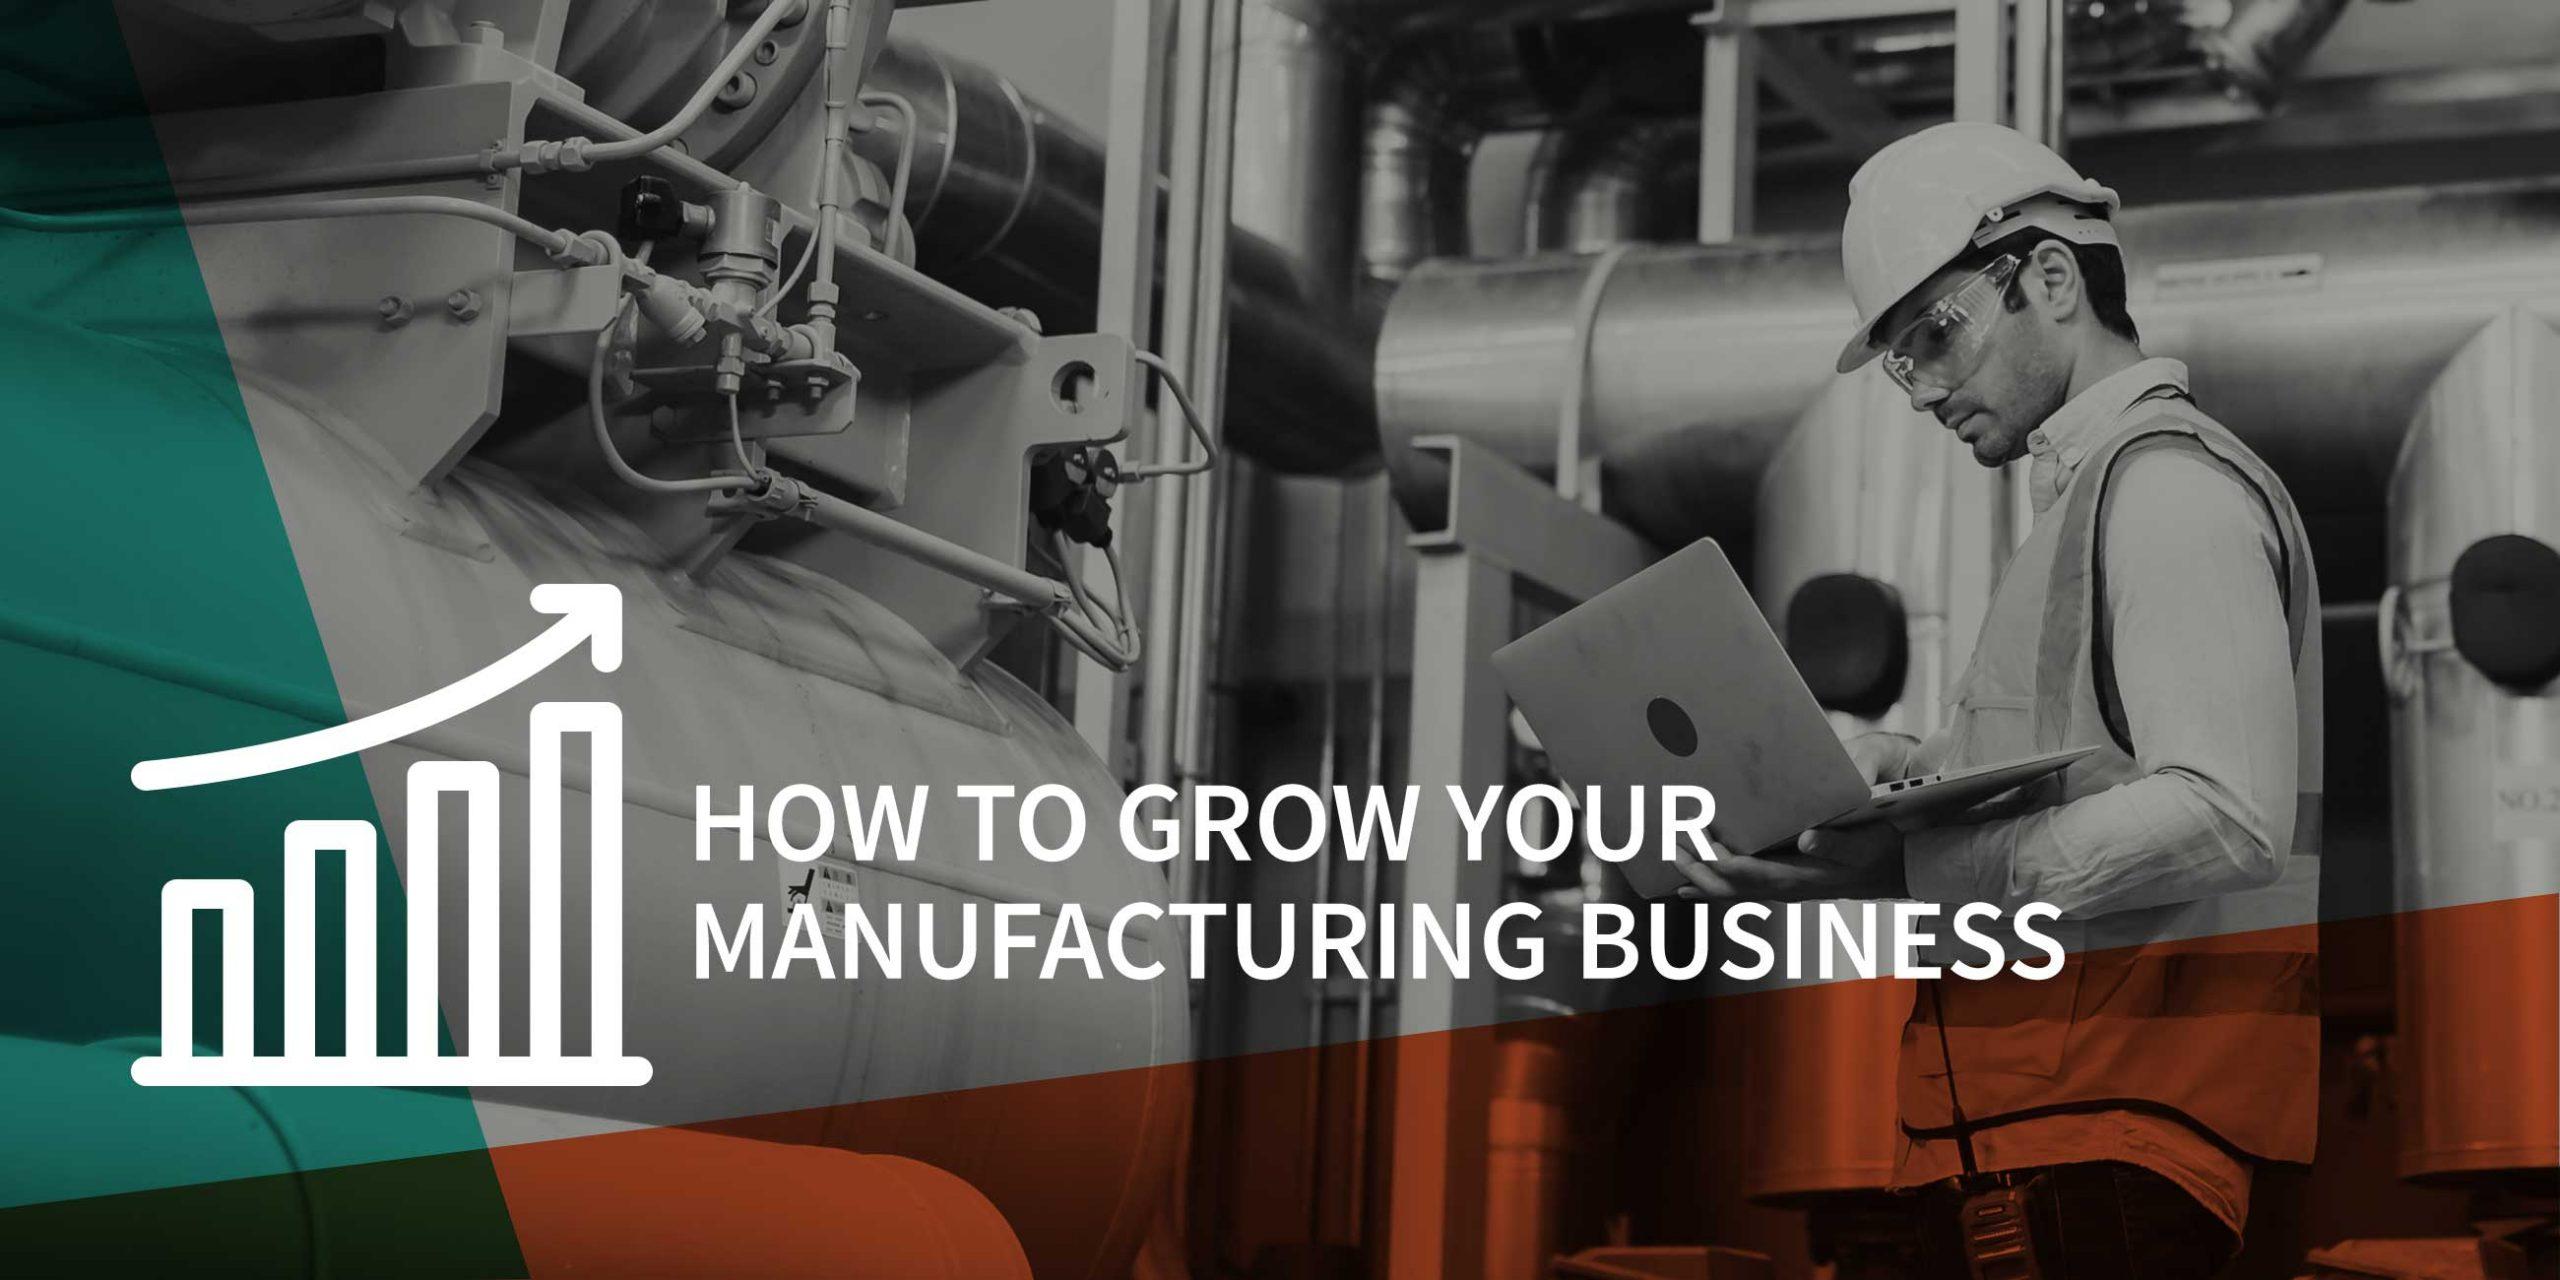 How to Grow Your Manufacturing Business